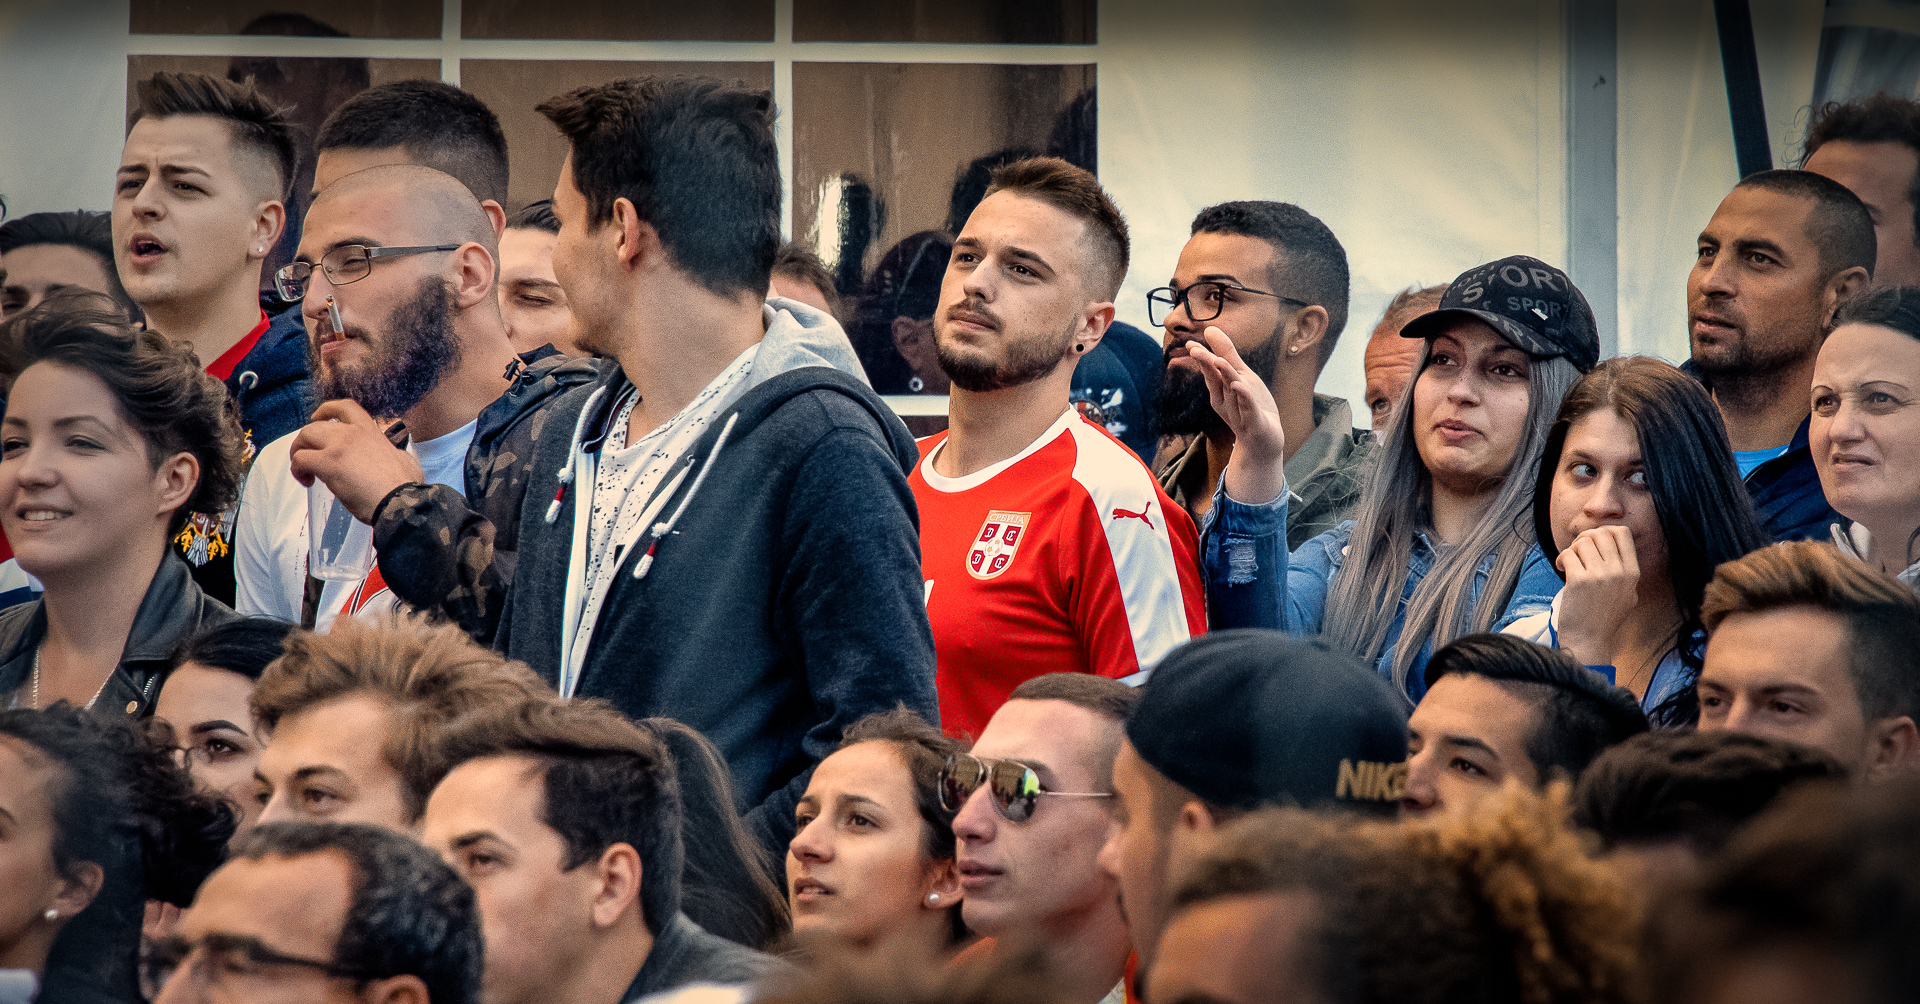 Ruth Benson Watching Soccer Highly Commended April 2019   Street Photography